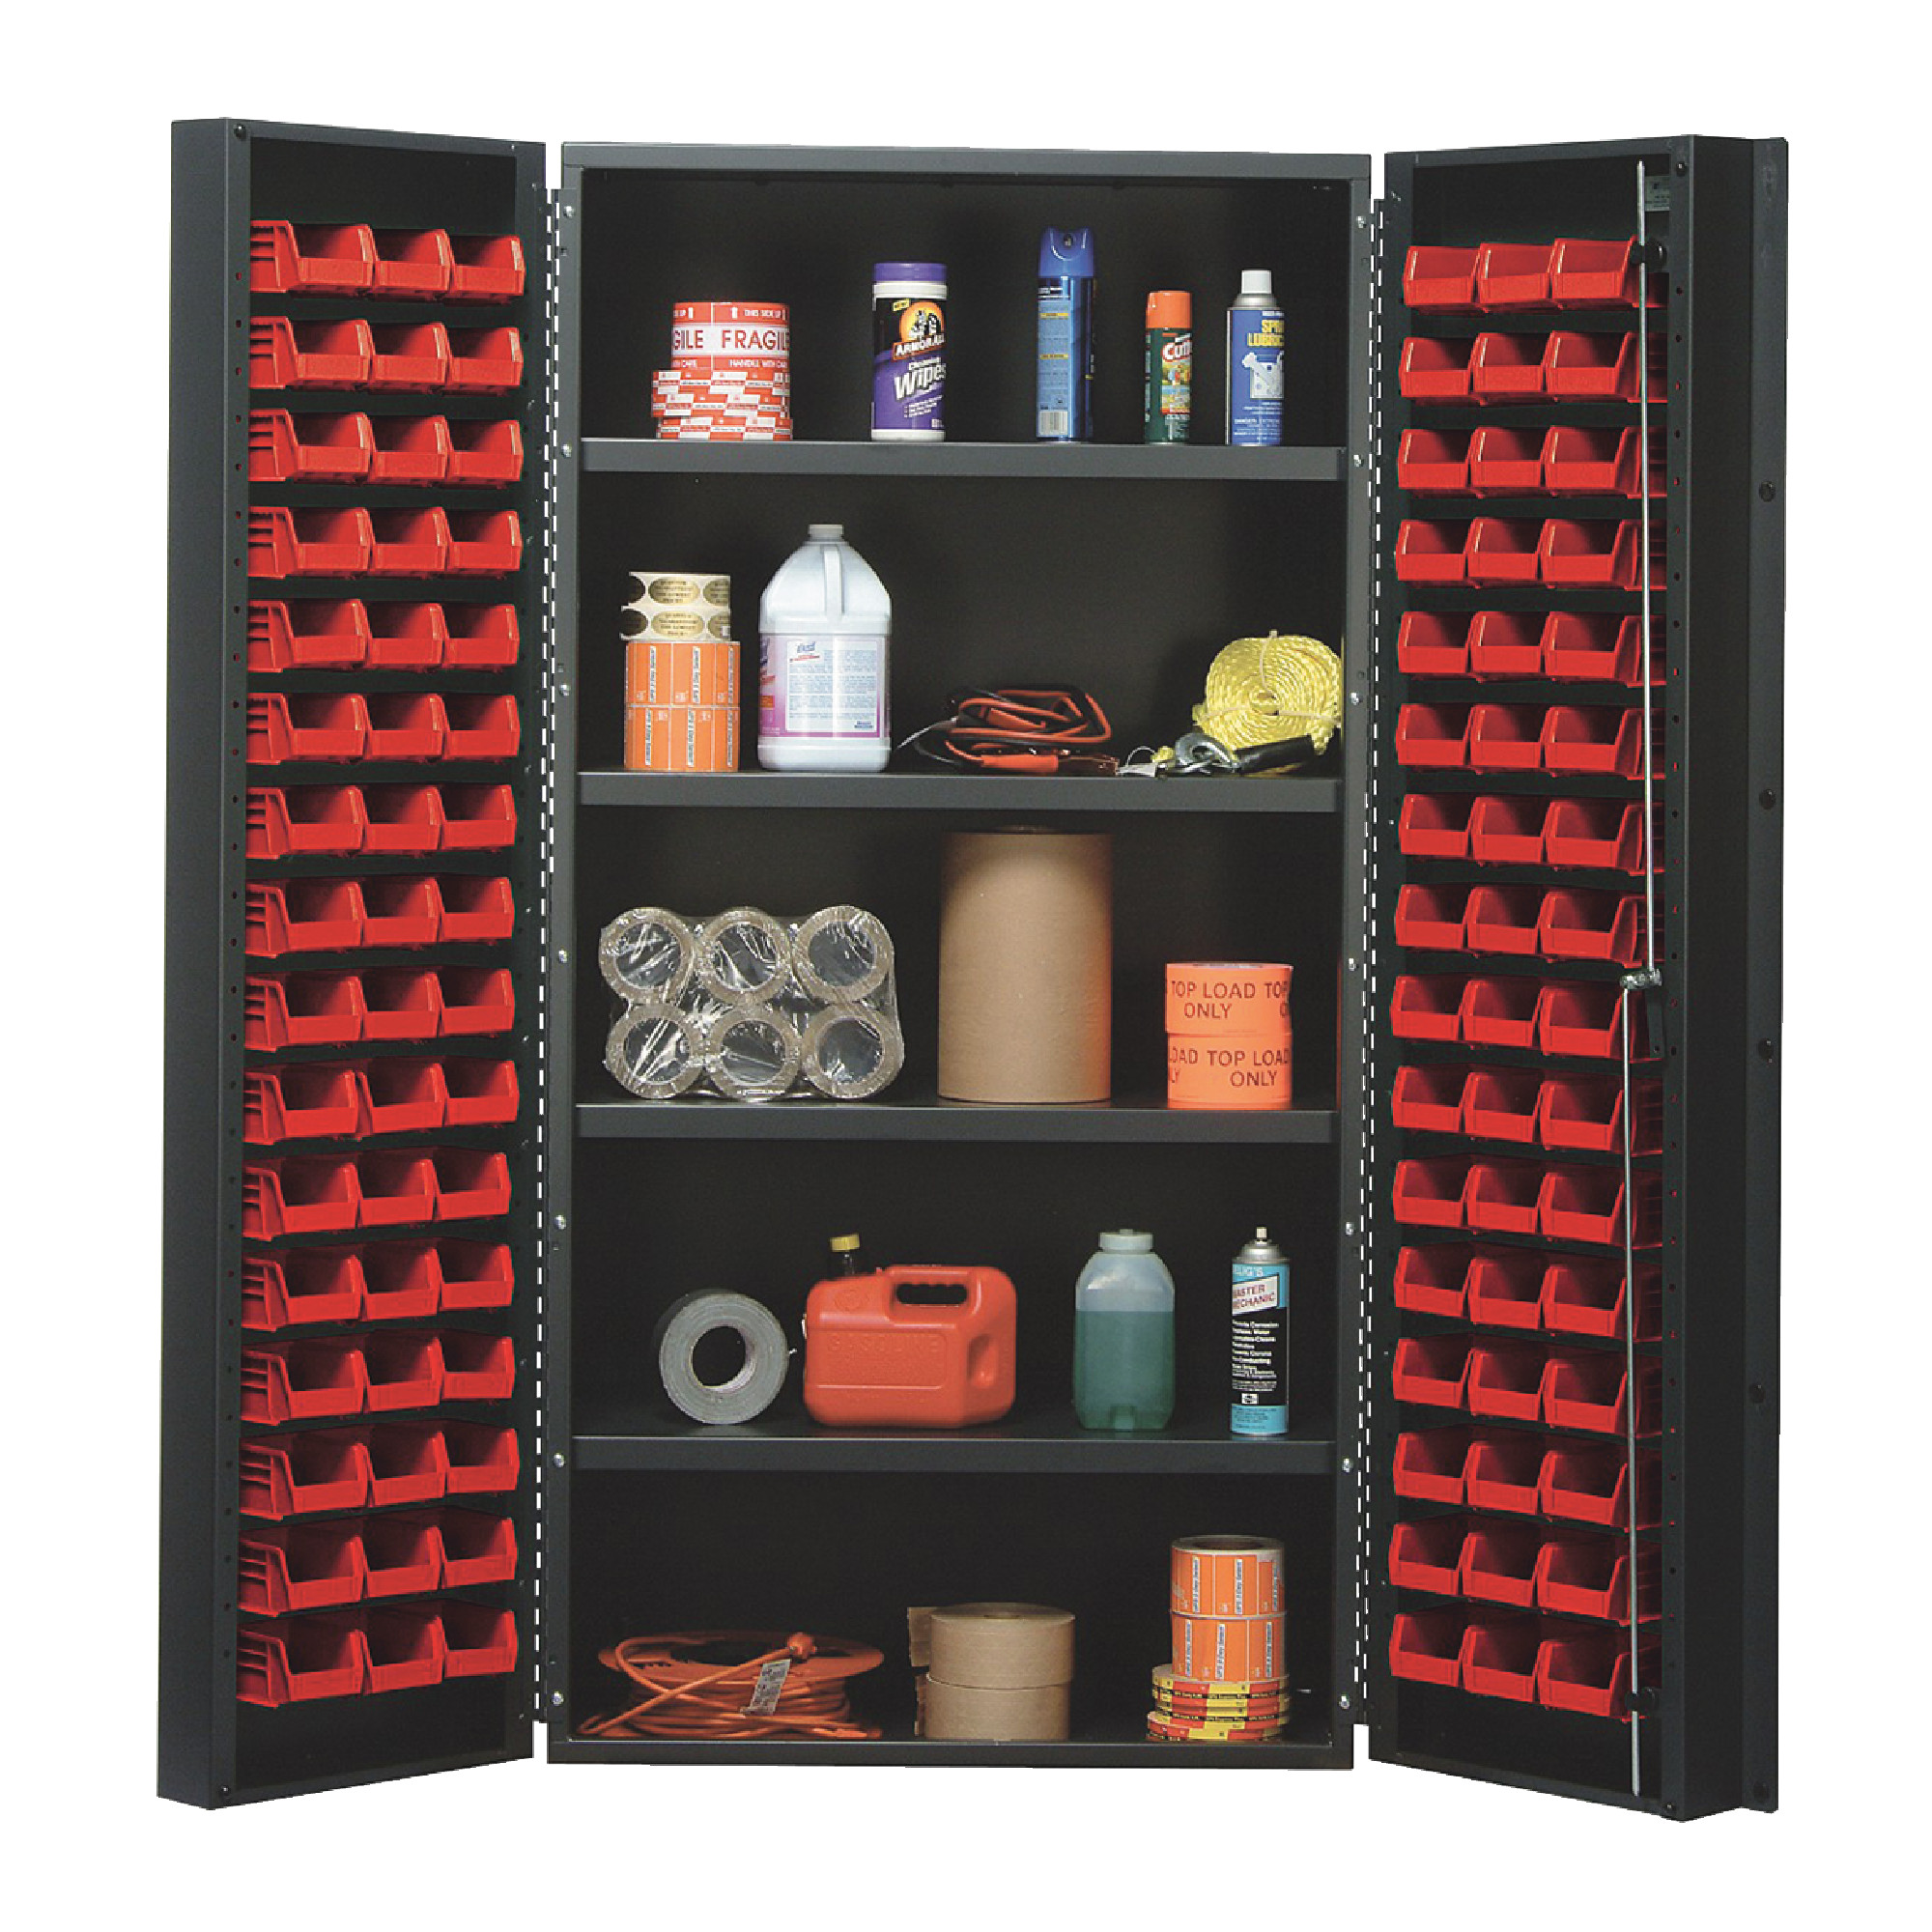 QUANTUM STORAGE SYSTEMS 36" Wide All Welded Floor Cabinet With 96 Red Bins